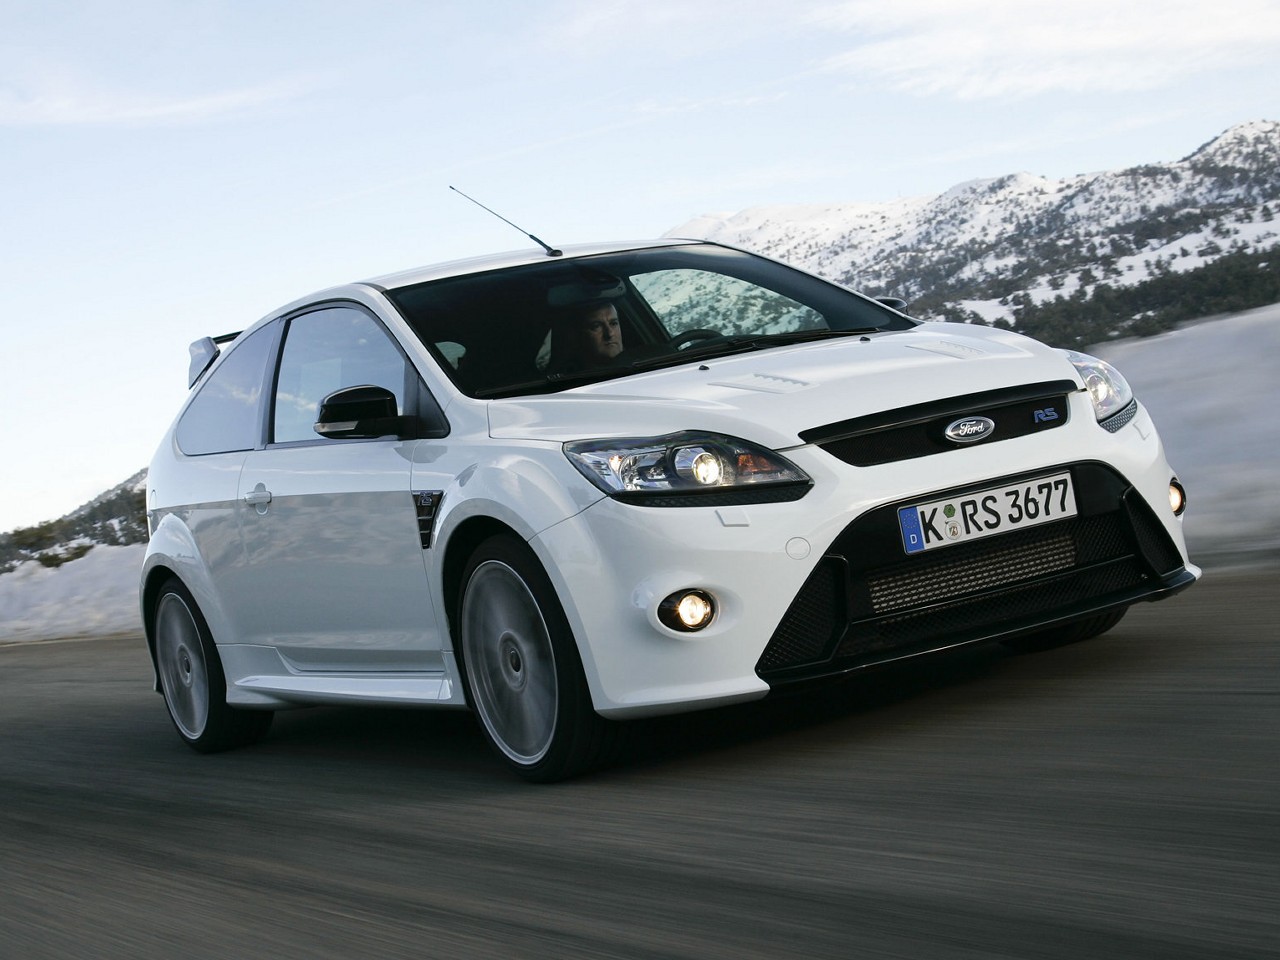 Ford focus transmission recall 2012 #3